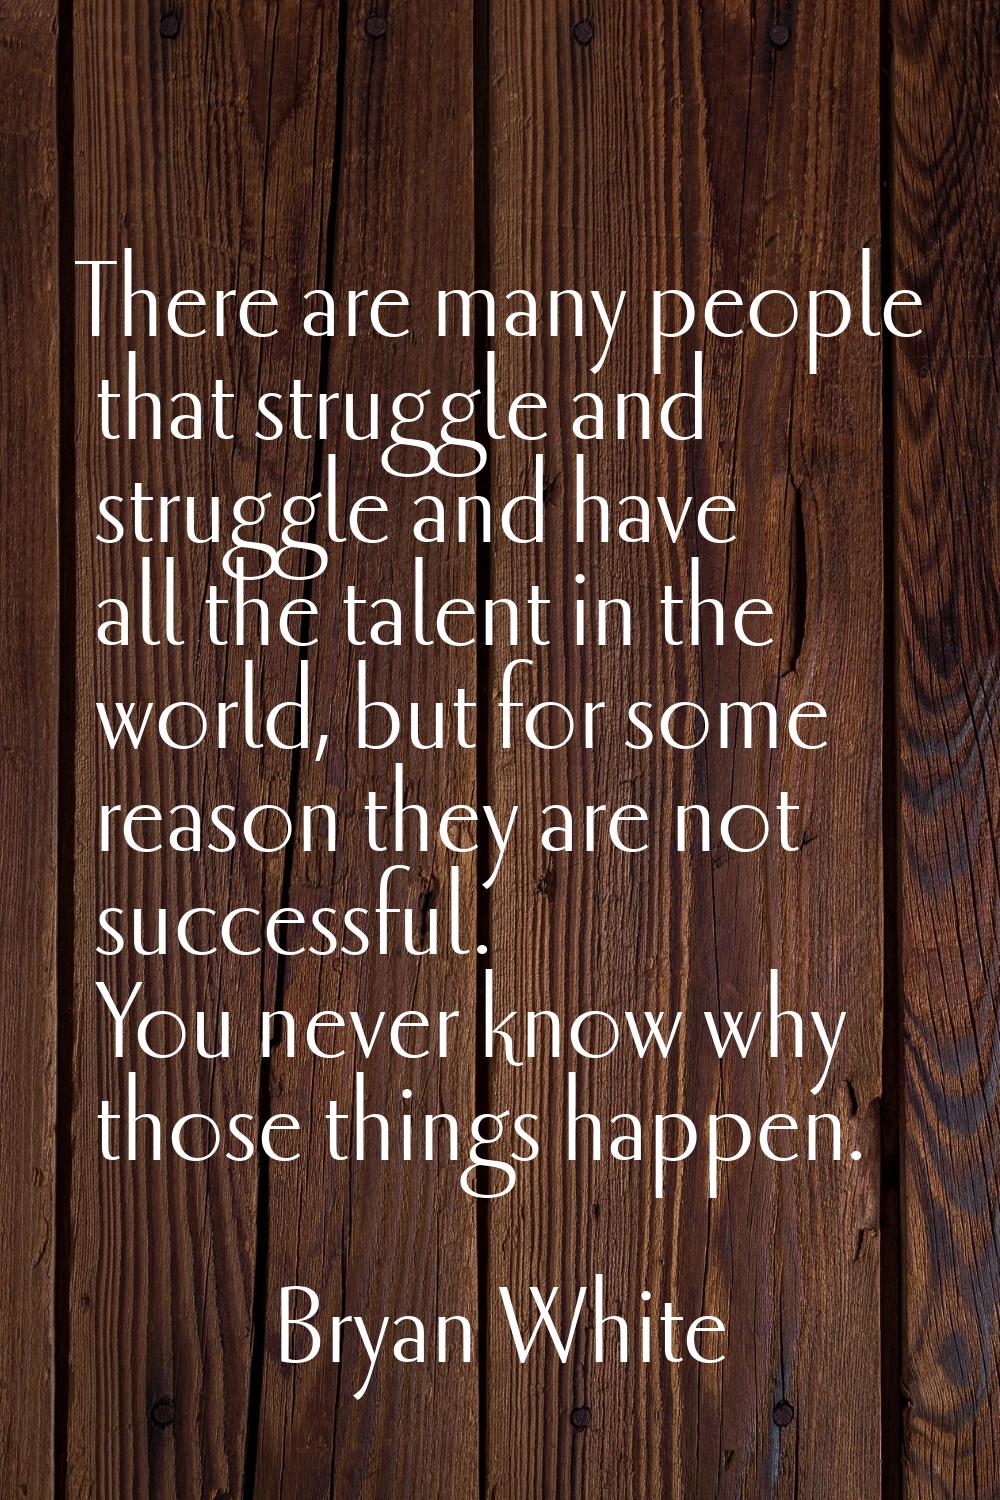 There are many people that struggle and struggle and have all the talent in the world, but for some